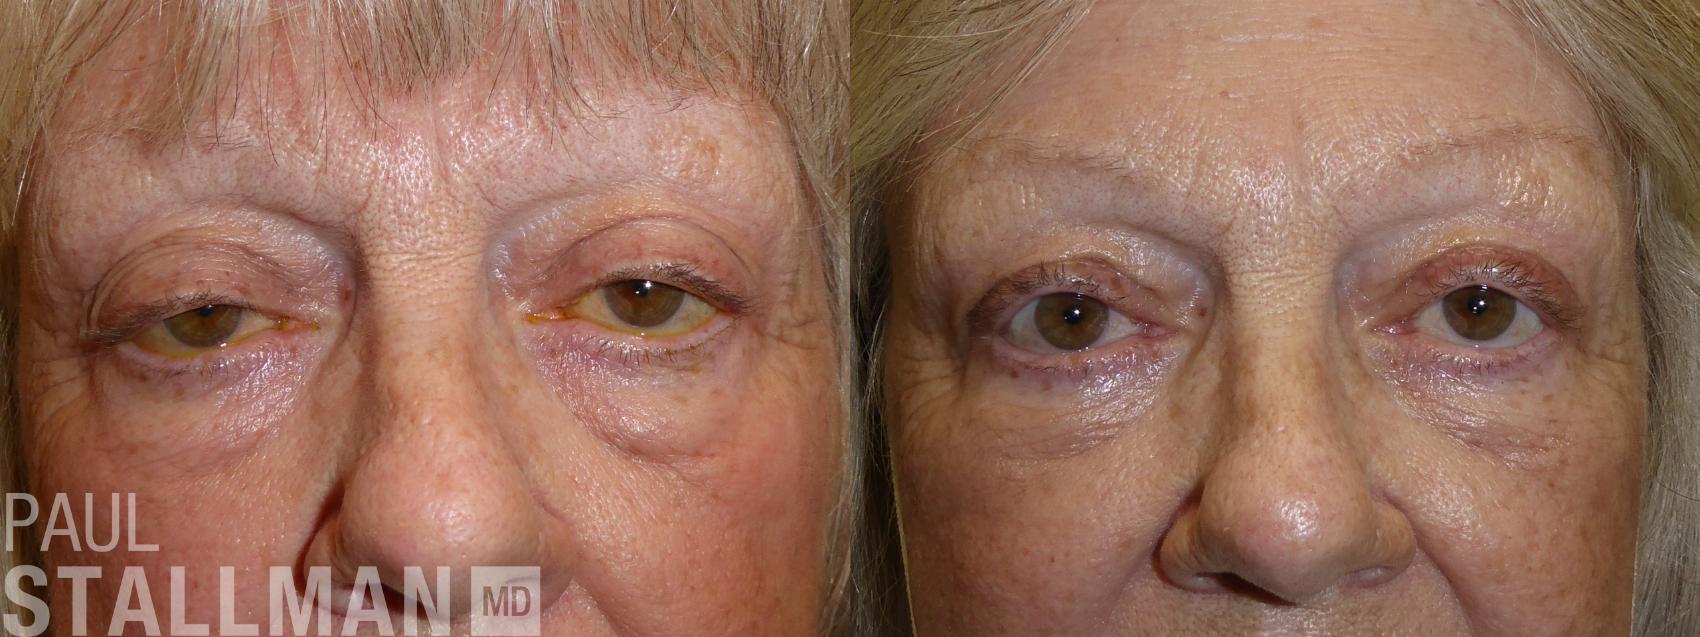 Before & After Blepharoplasty for Women Case 179 Front View in Fresno, Santa Maria, San Luis Obispo, CA